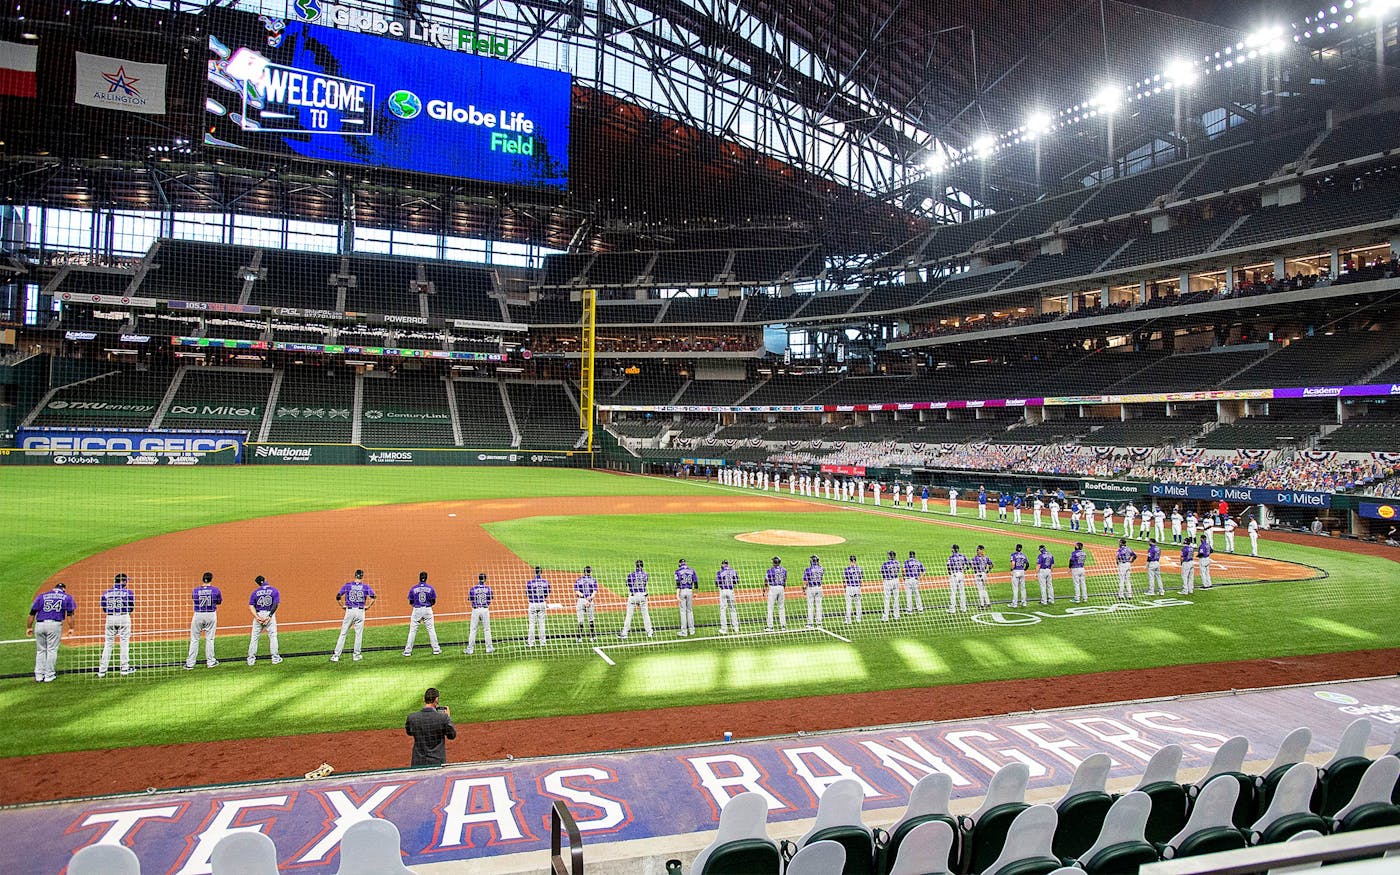 Opening Day lineup for the Texas Rangers